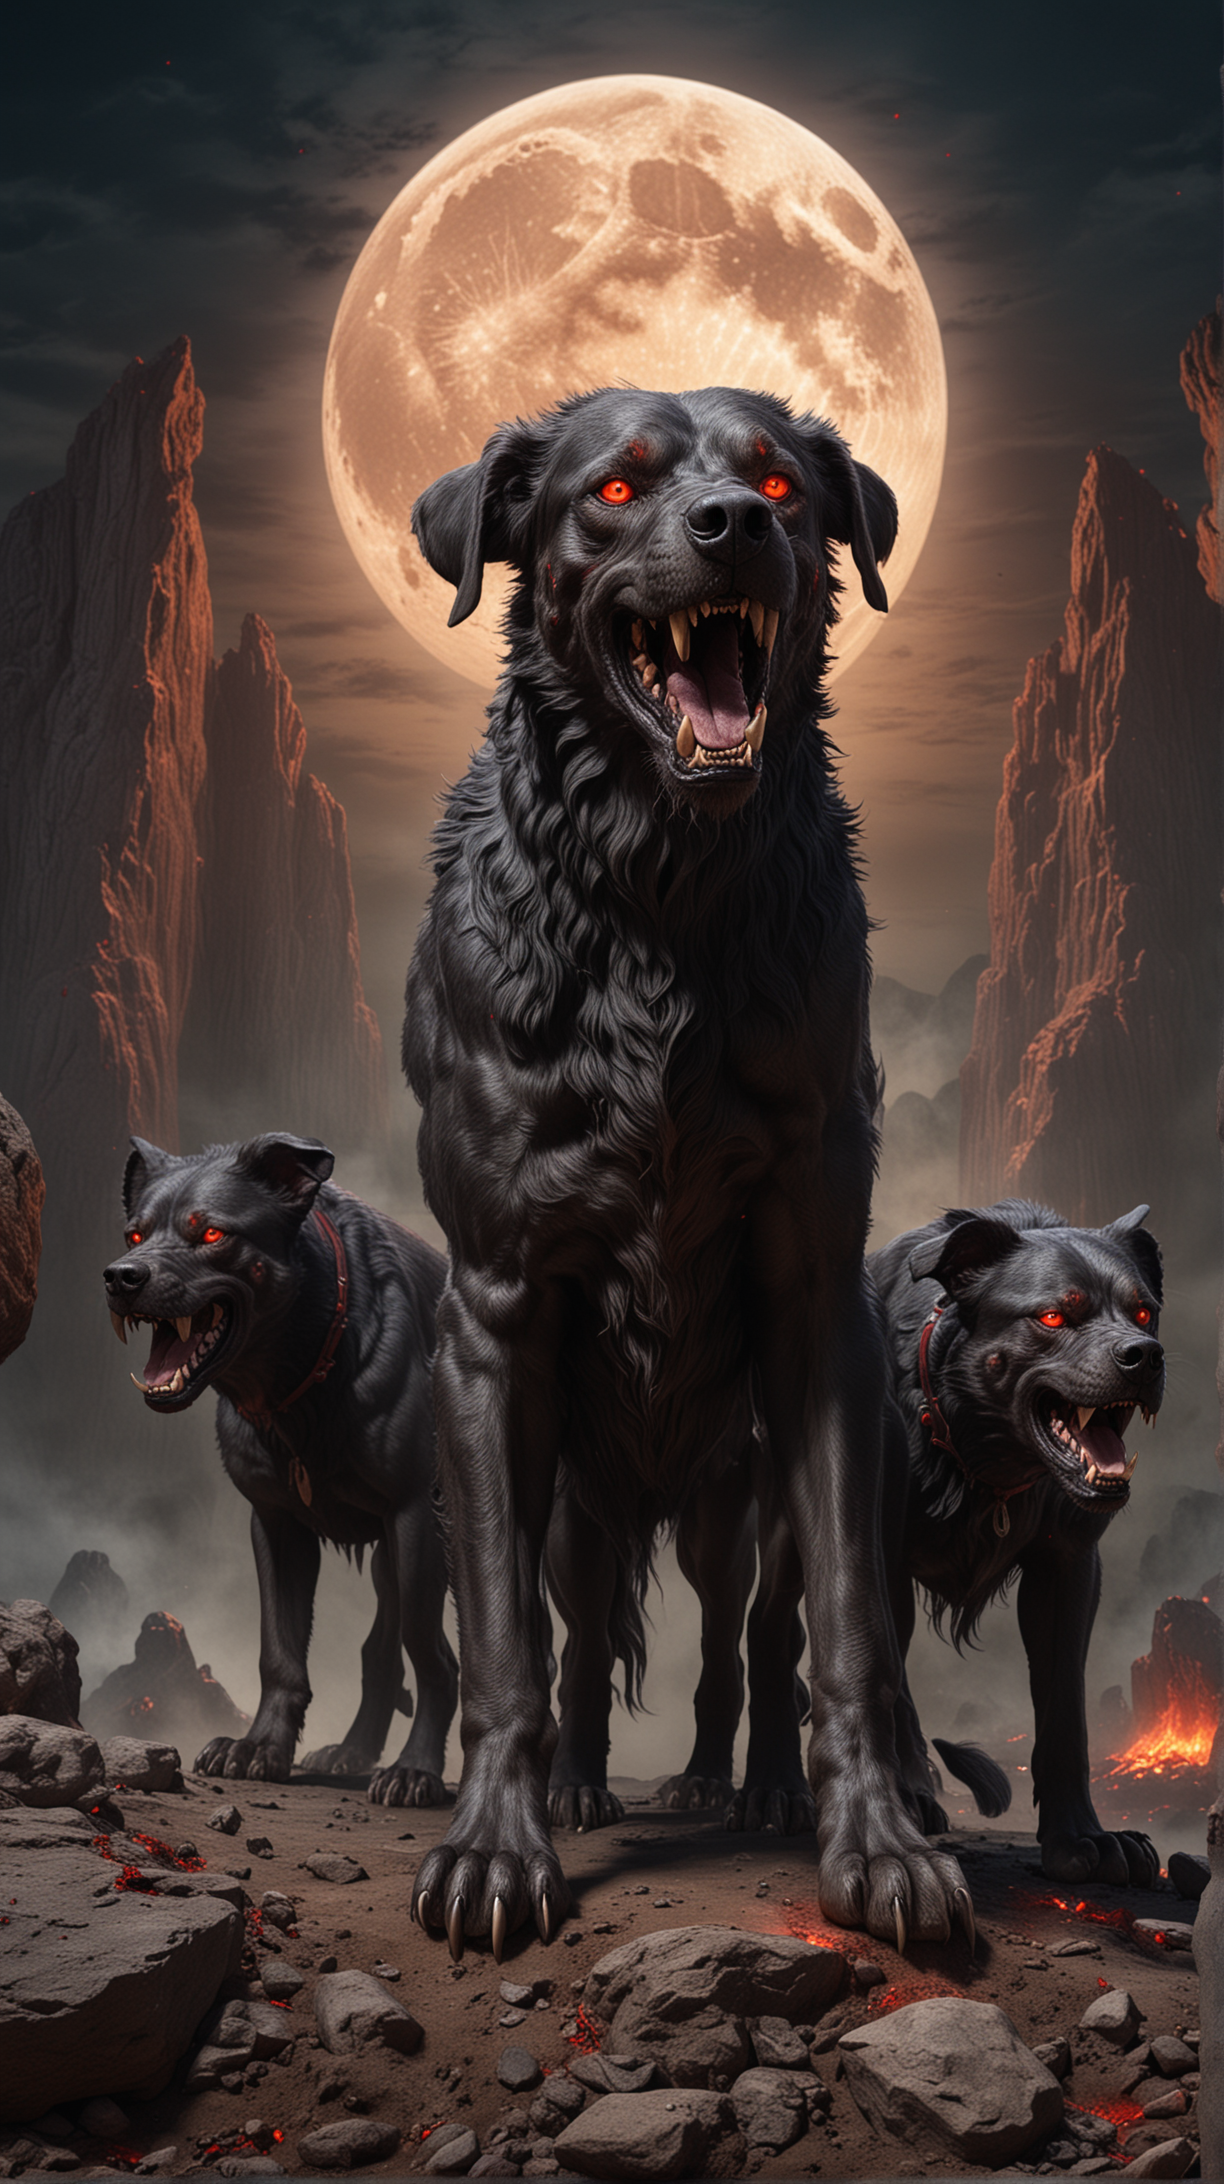 Cerberus as a giant with three-headed dog with one body and bllod-red eyes, fire and cave on background with shining moon, photo-realistic, hyper-realistic